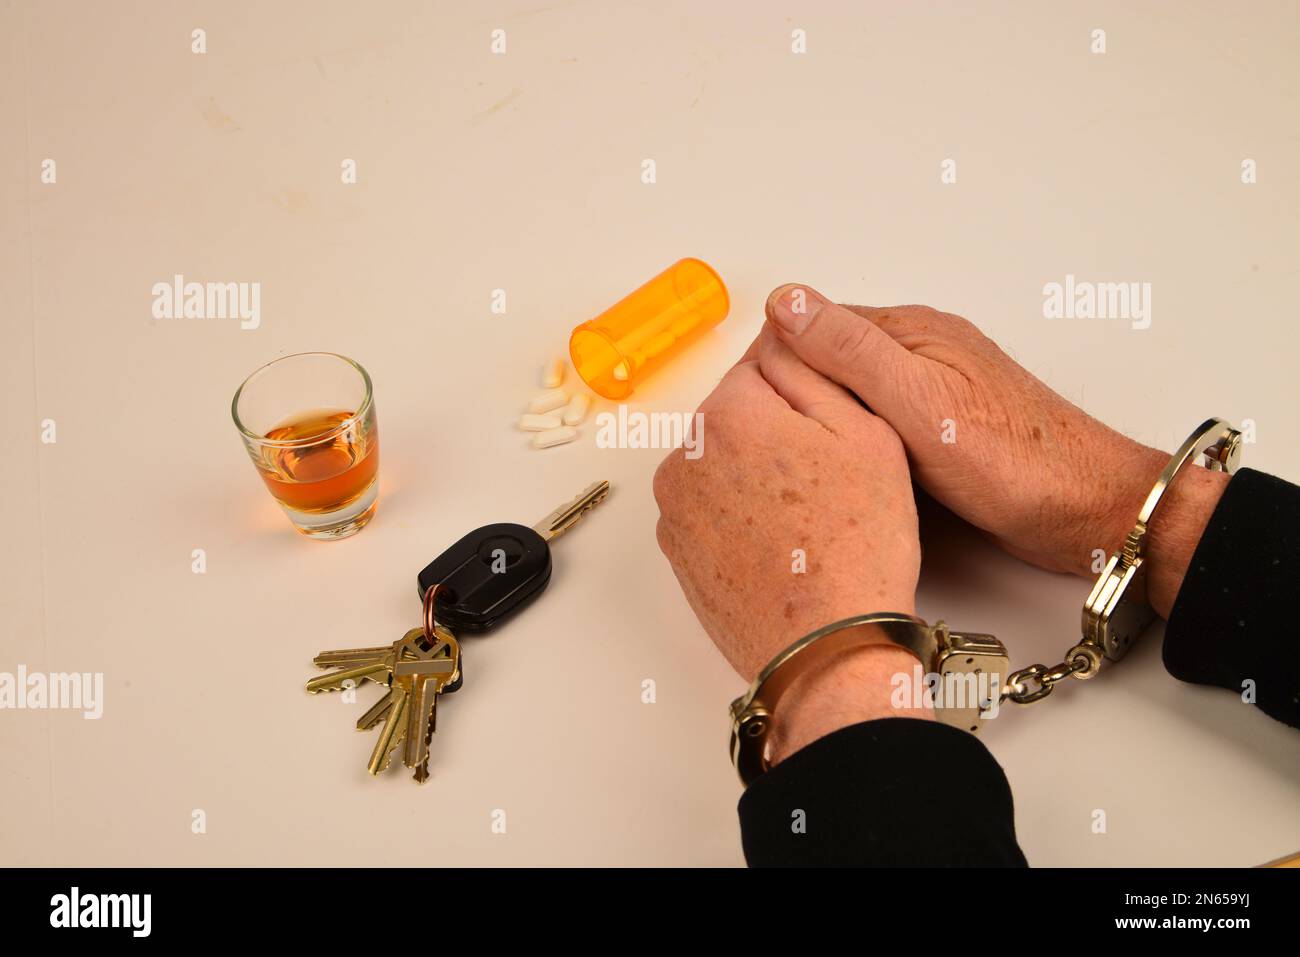 Handcuffed wrists with vehicle keys and alcohol containers symbols of substance use and driving. Stock Photo